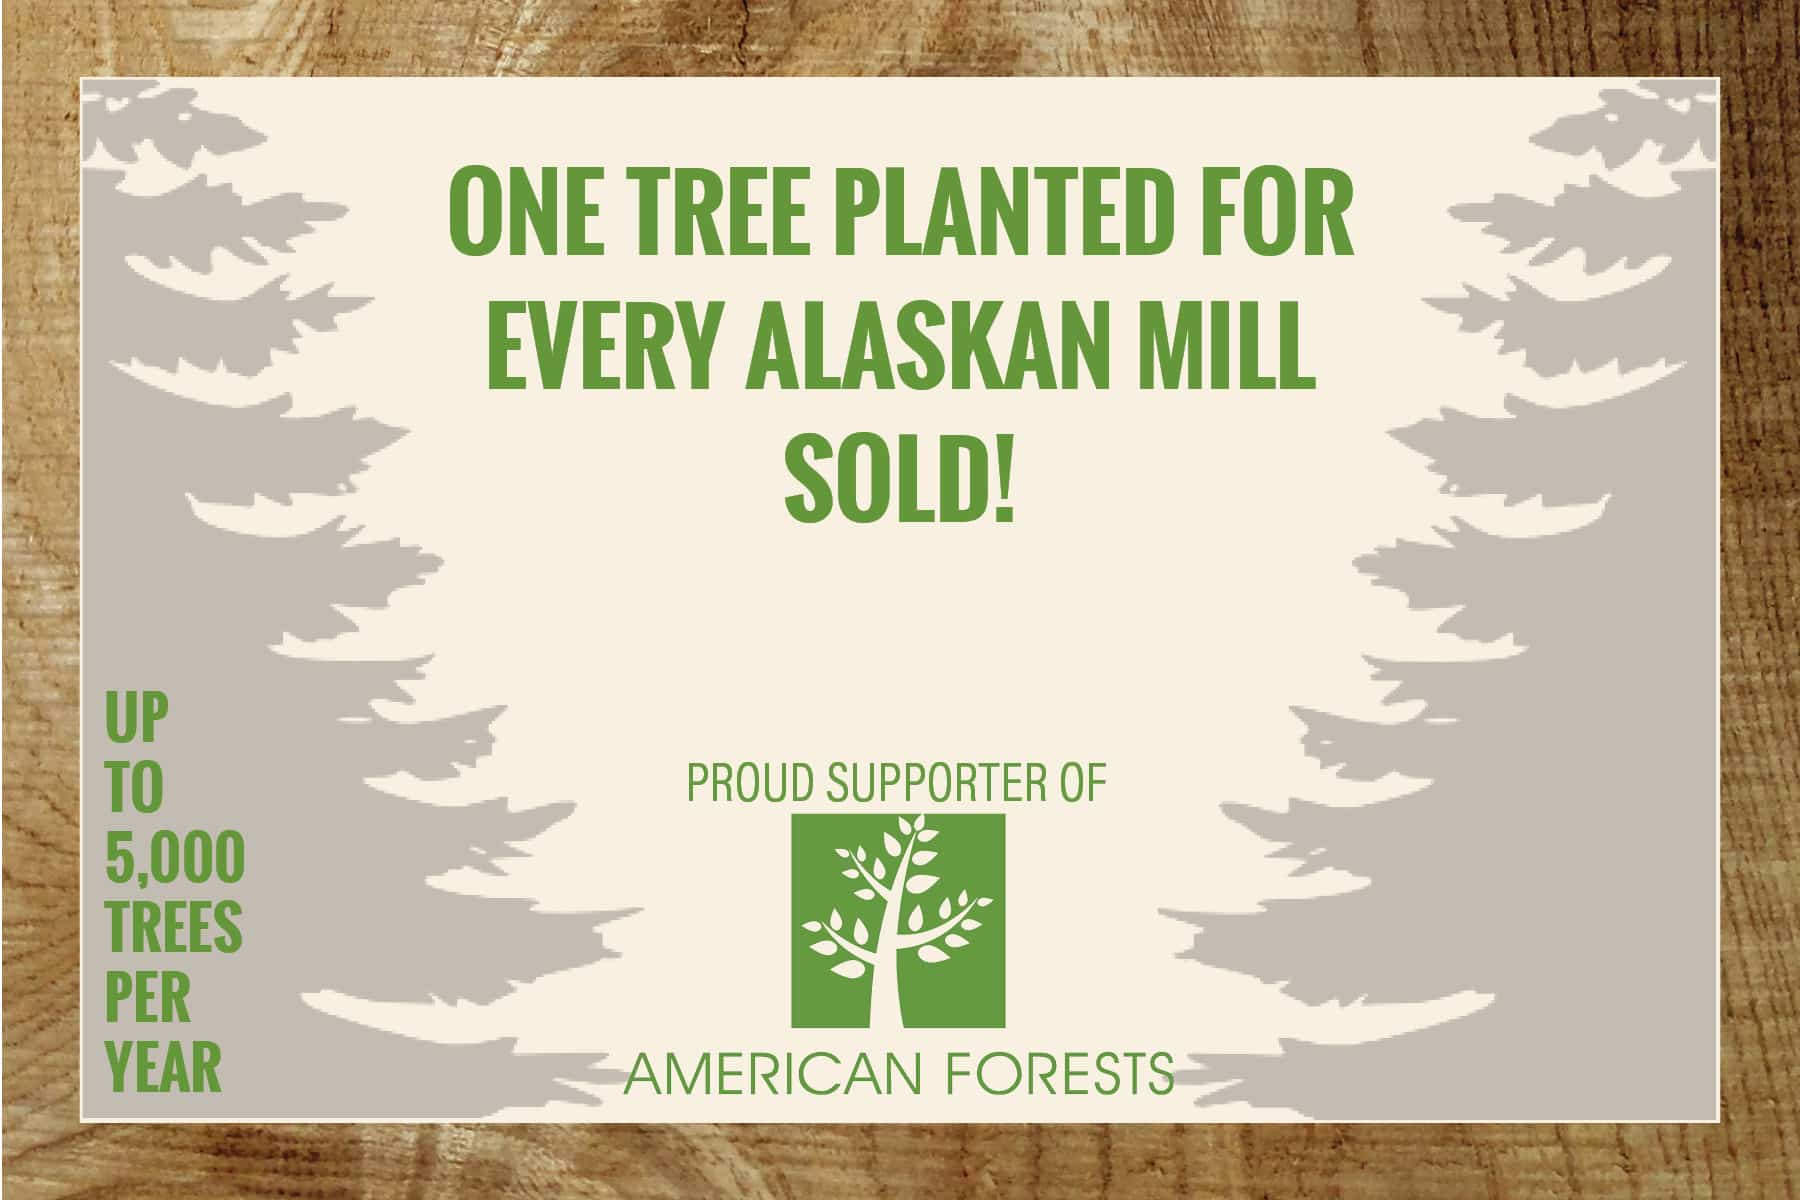 Buy an Alaskan Plant a Tree FOR CONTACT US PAGE